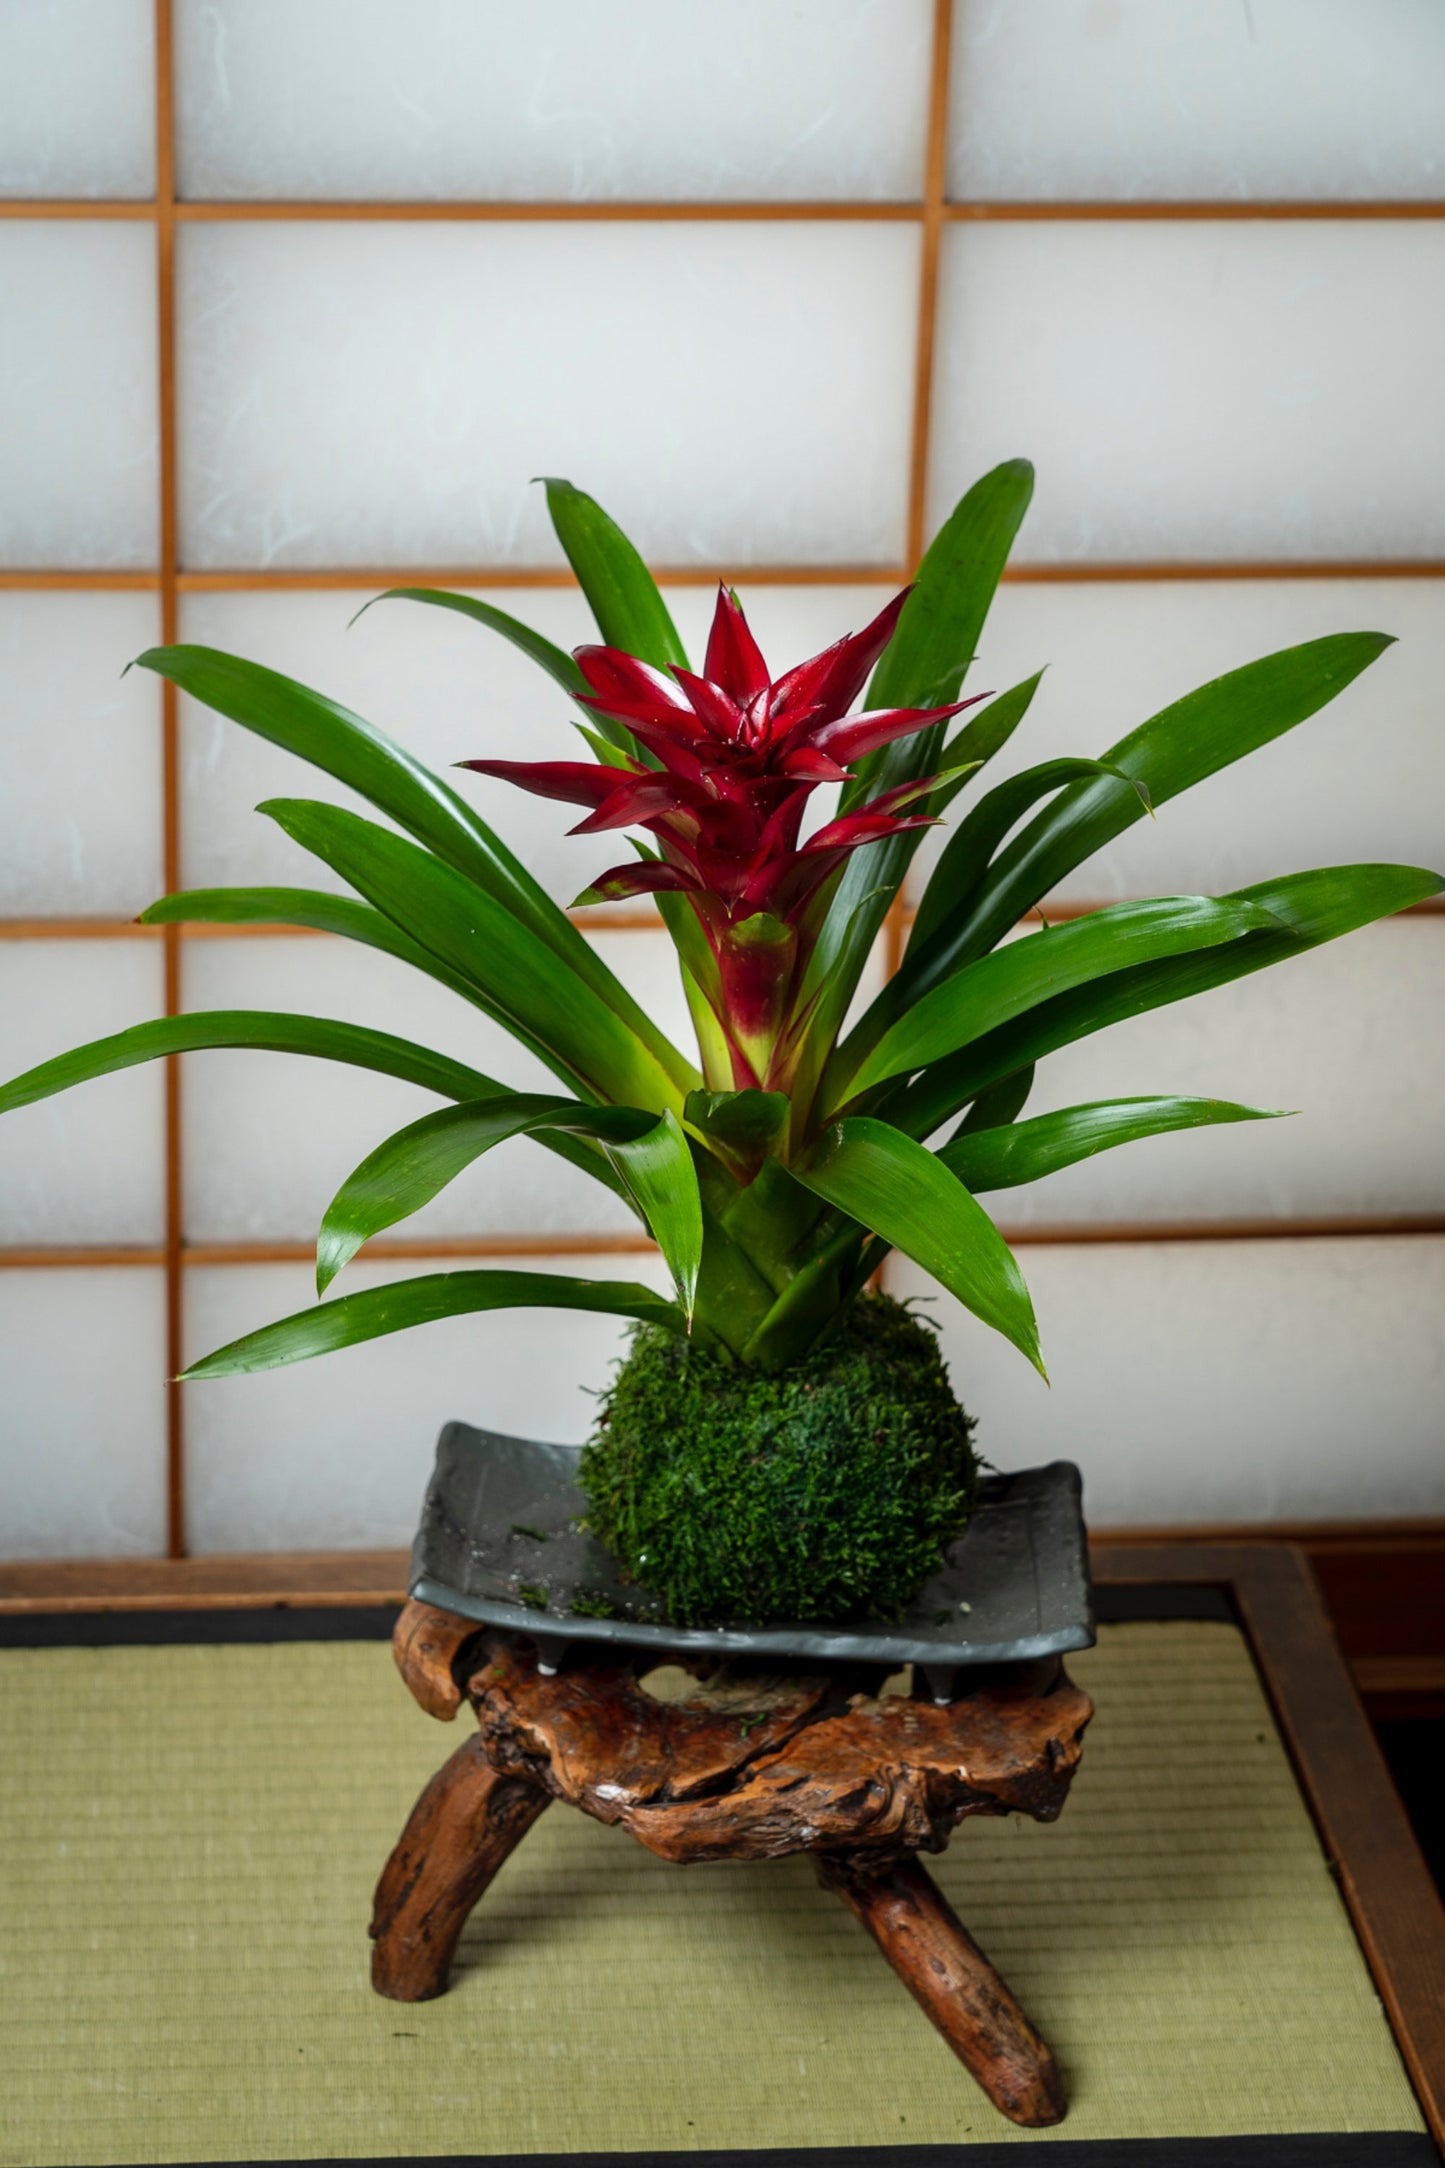 Lovely Burgundy colored Bromeliad Kokedama - Moss ball, Japanese indoor garden technique, cleanliness look live house decoration.